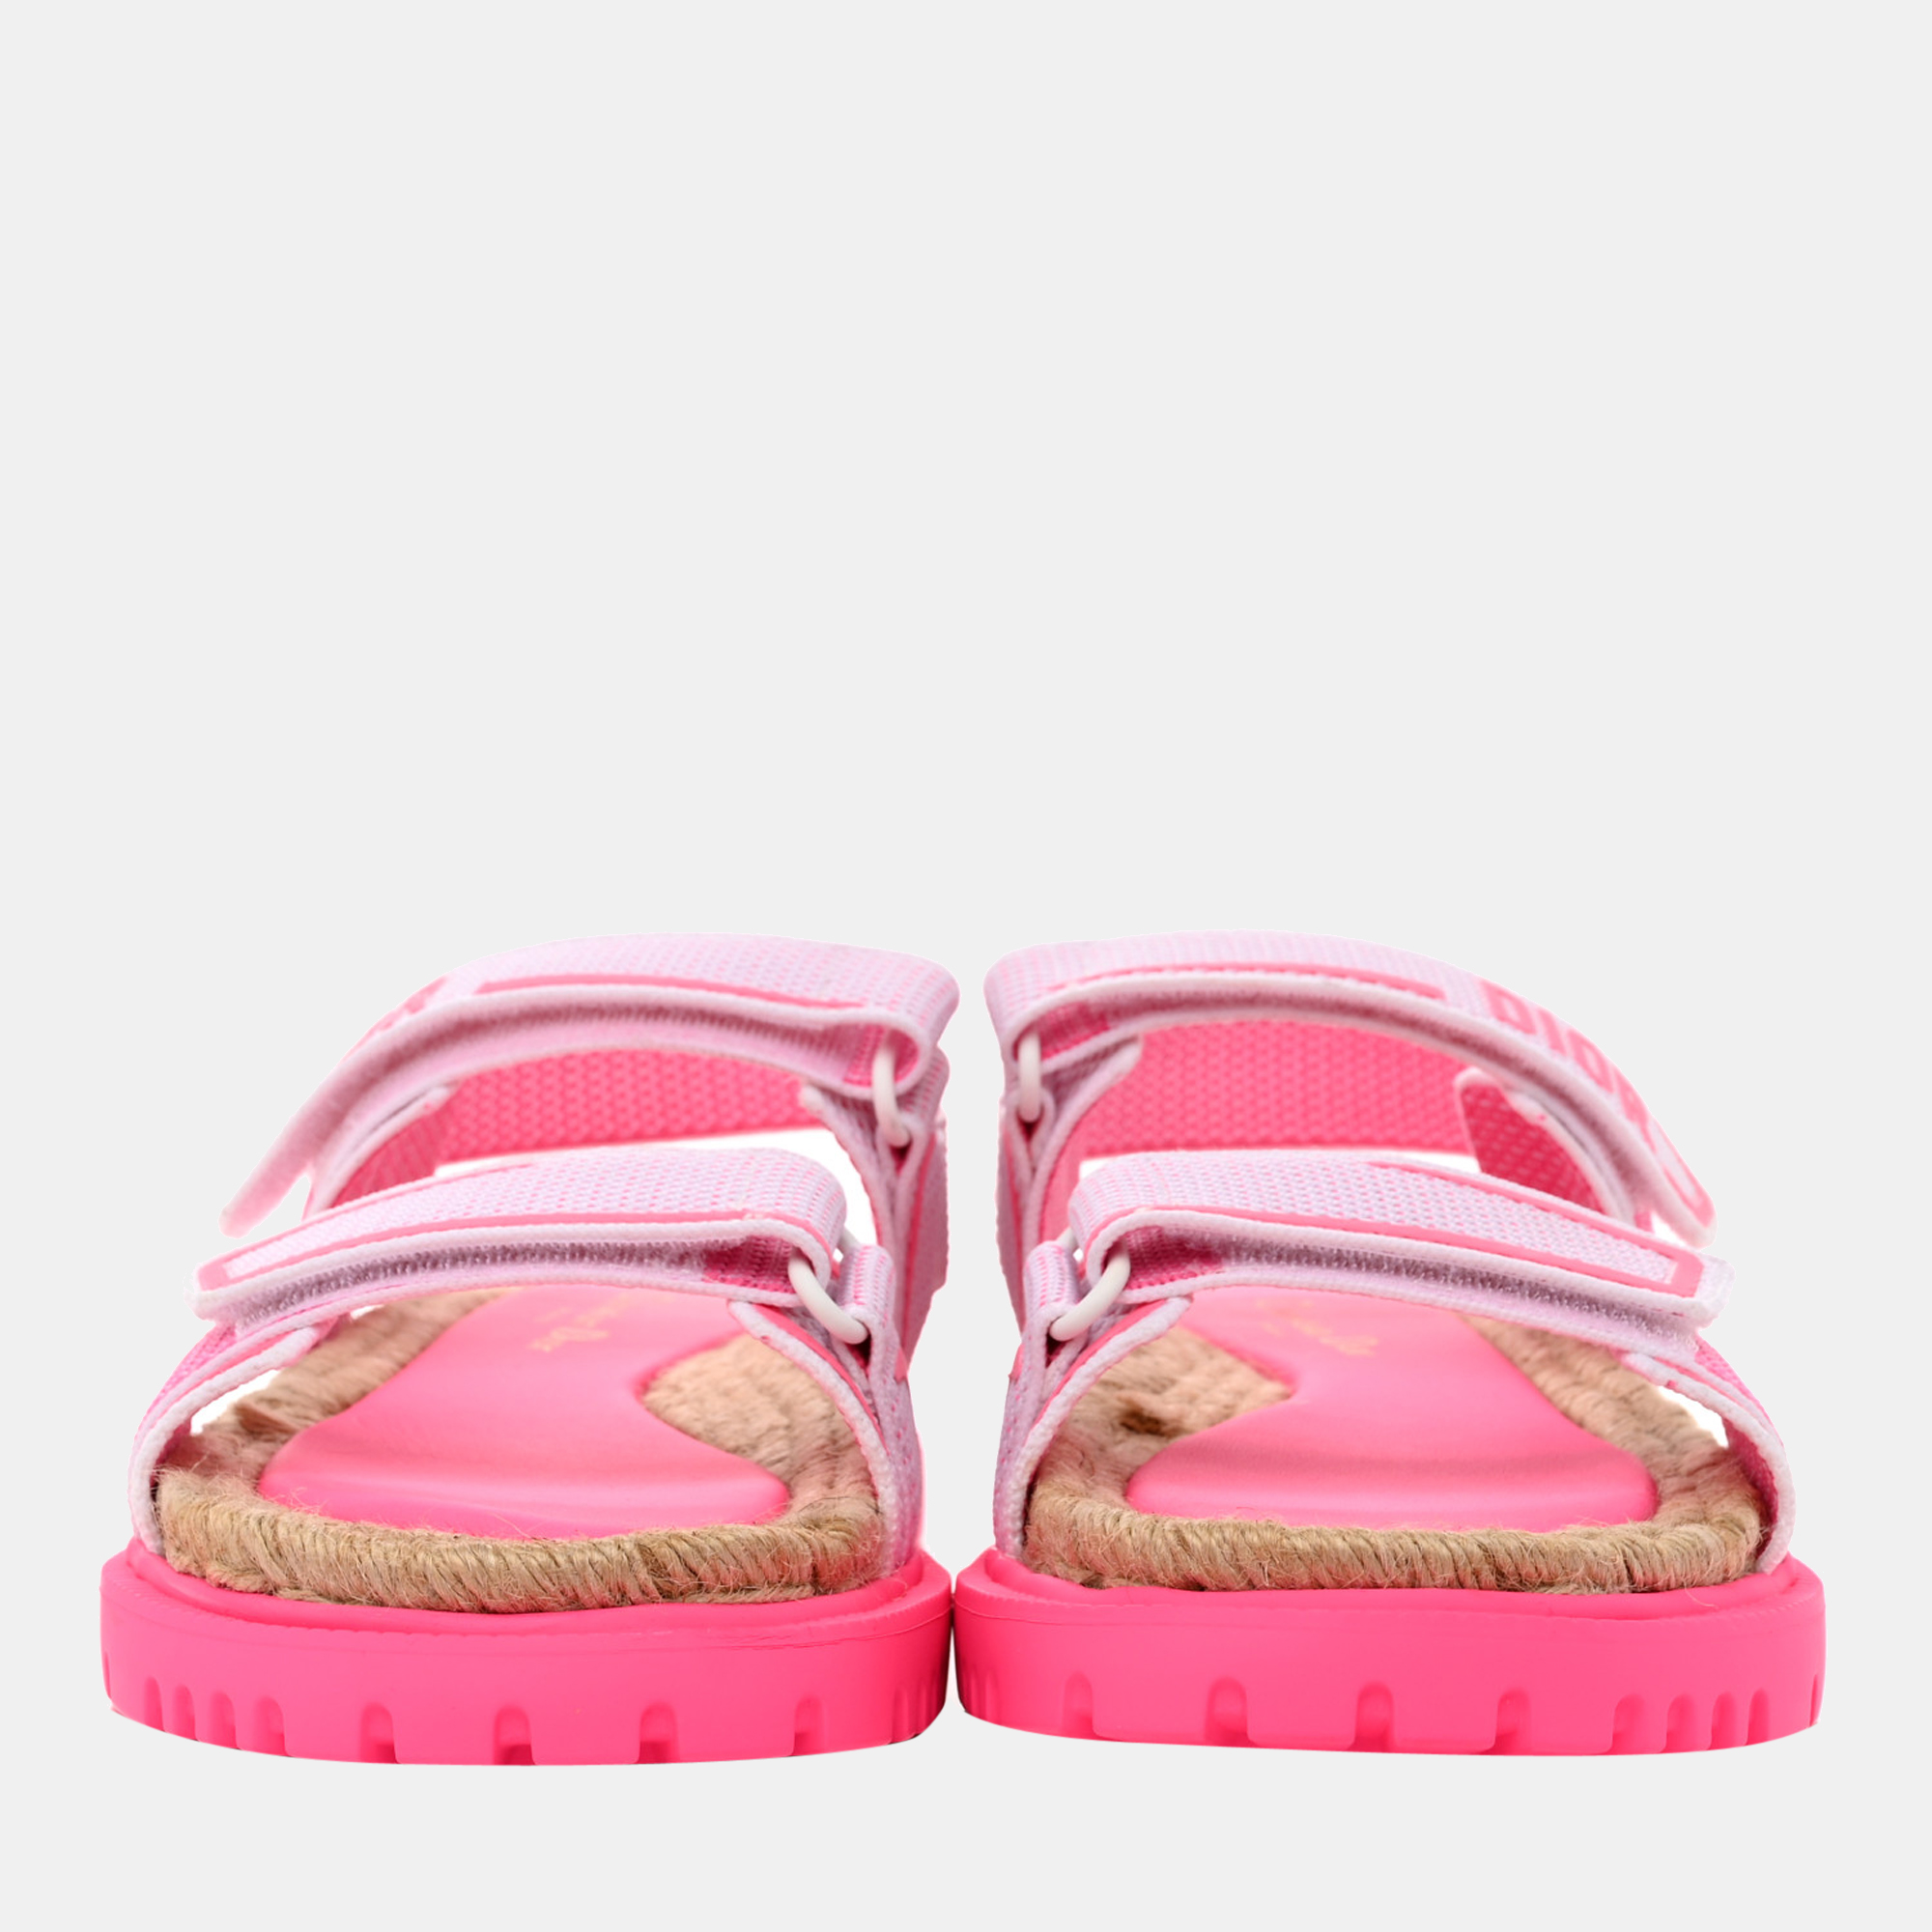 DIOR White And Bright Pink Technical Mesh And Rubber DIORACT SANDAL KCQ691TKJ76W38